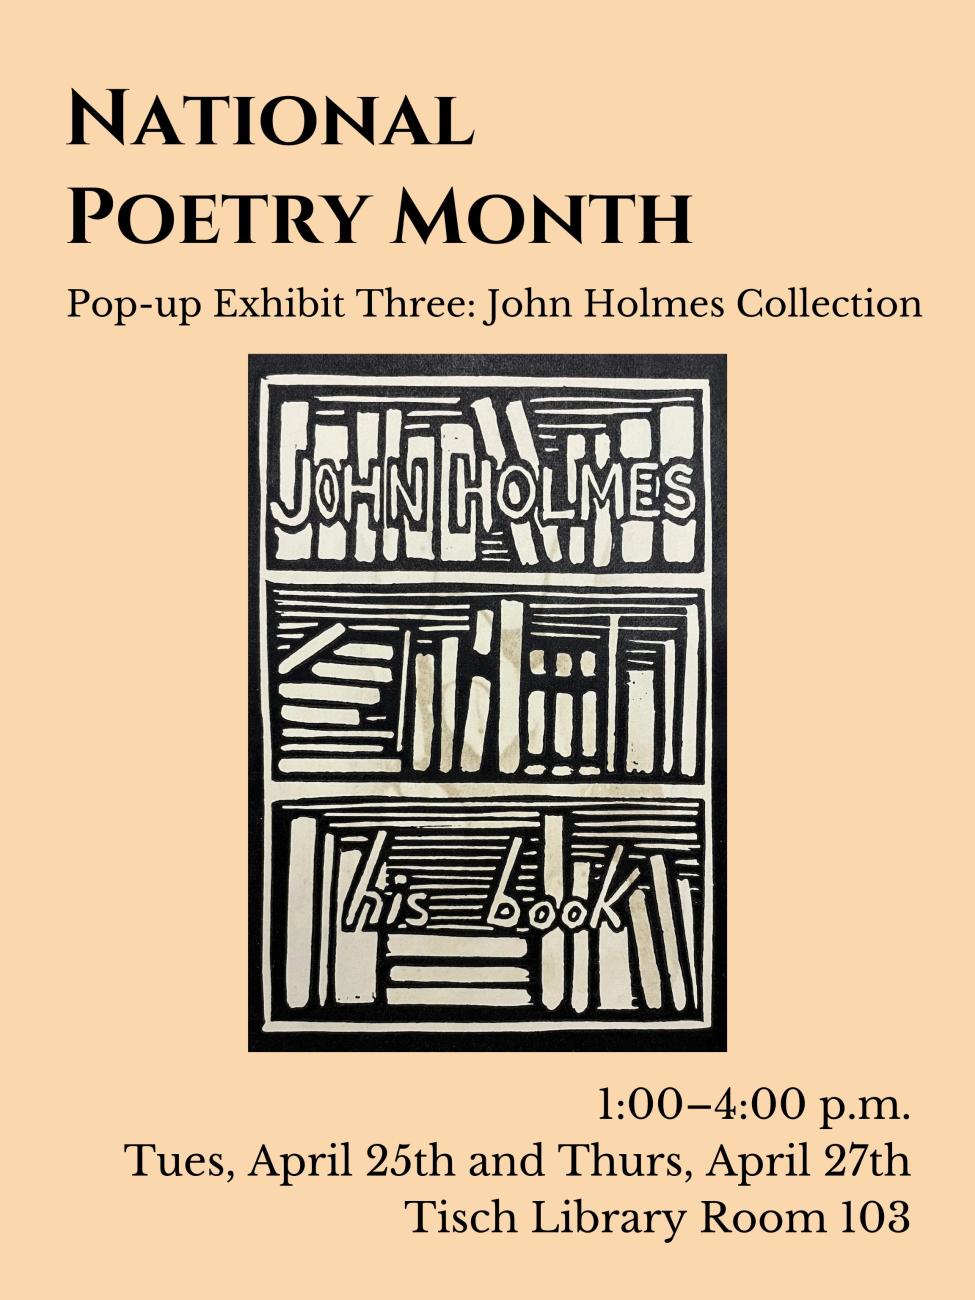 National Poetry Month: Pop-up Exhibit Three – The John Holmes Poetry Collection on Tuesday, April 25th and Thursday, April 27th at 1:00-4:00 PM in Tisch Library Room 103